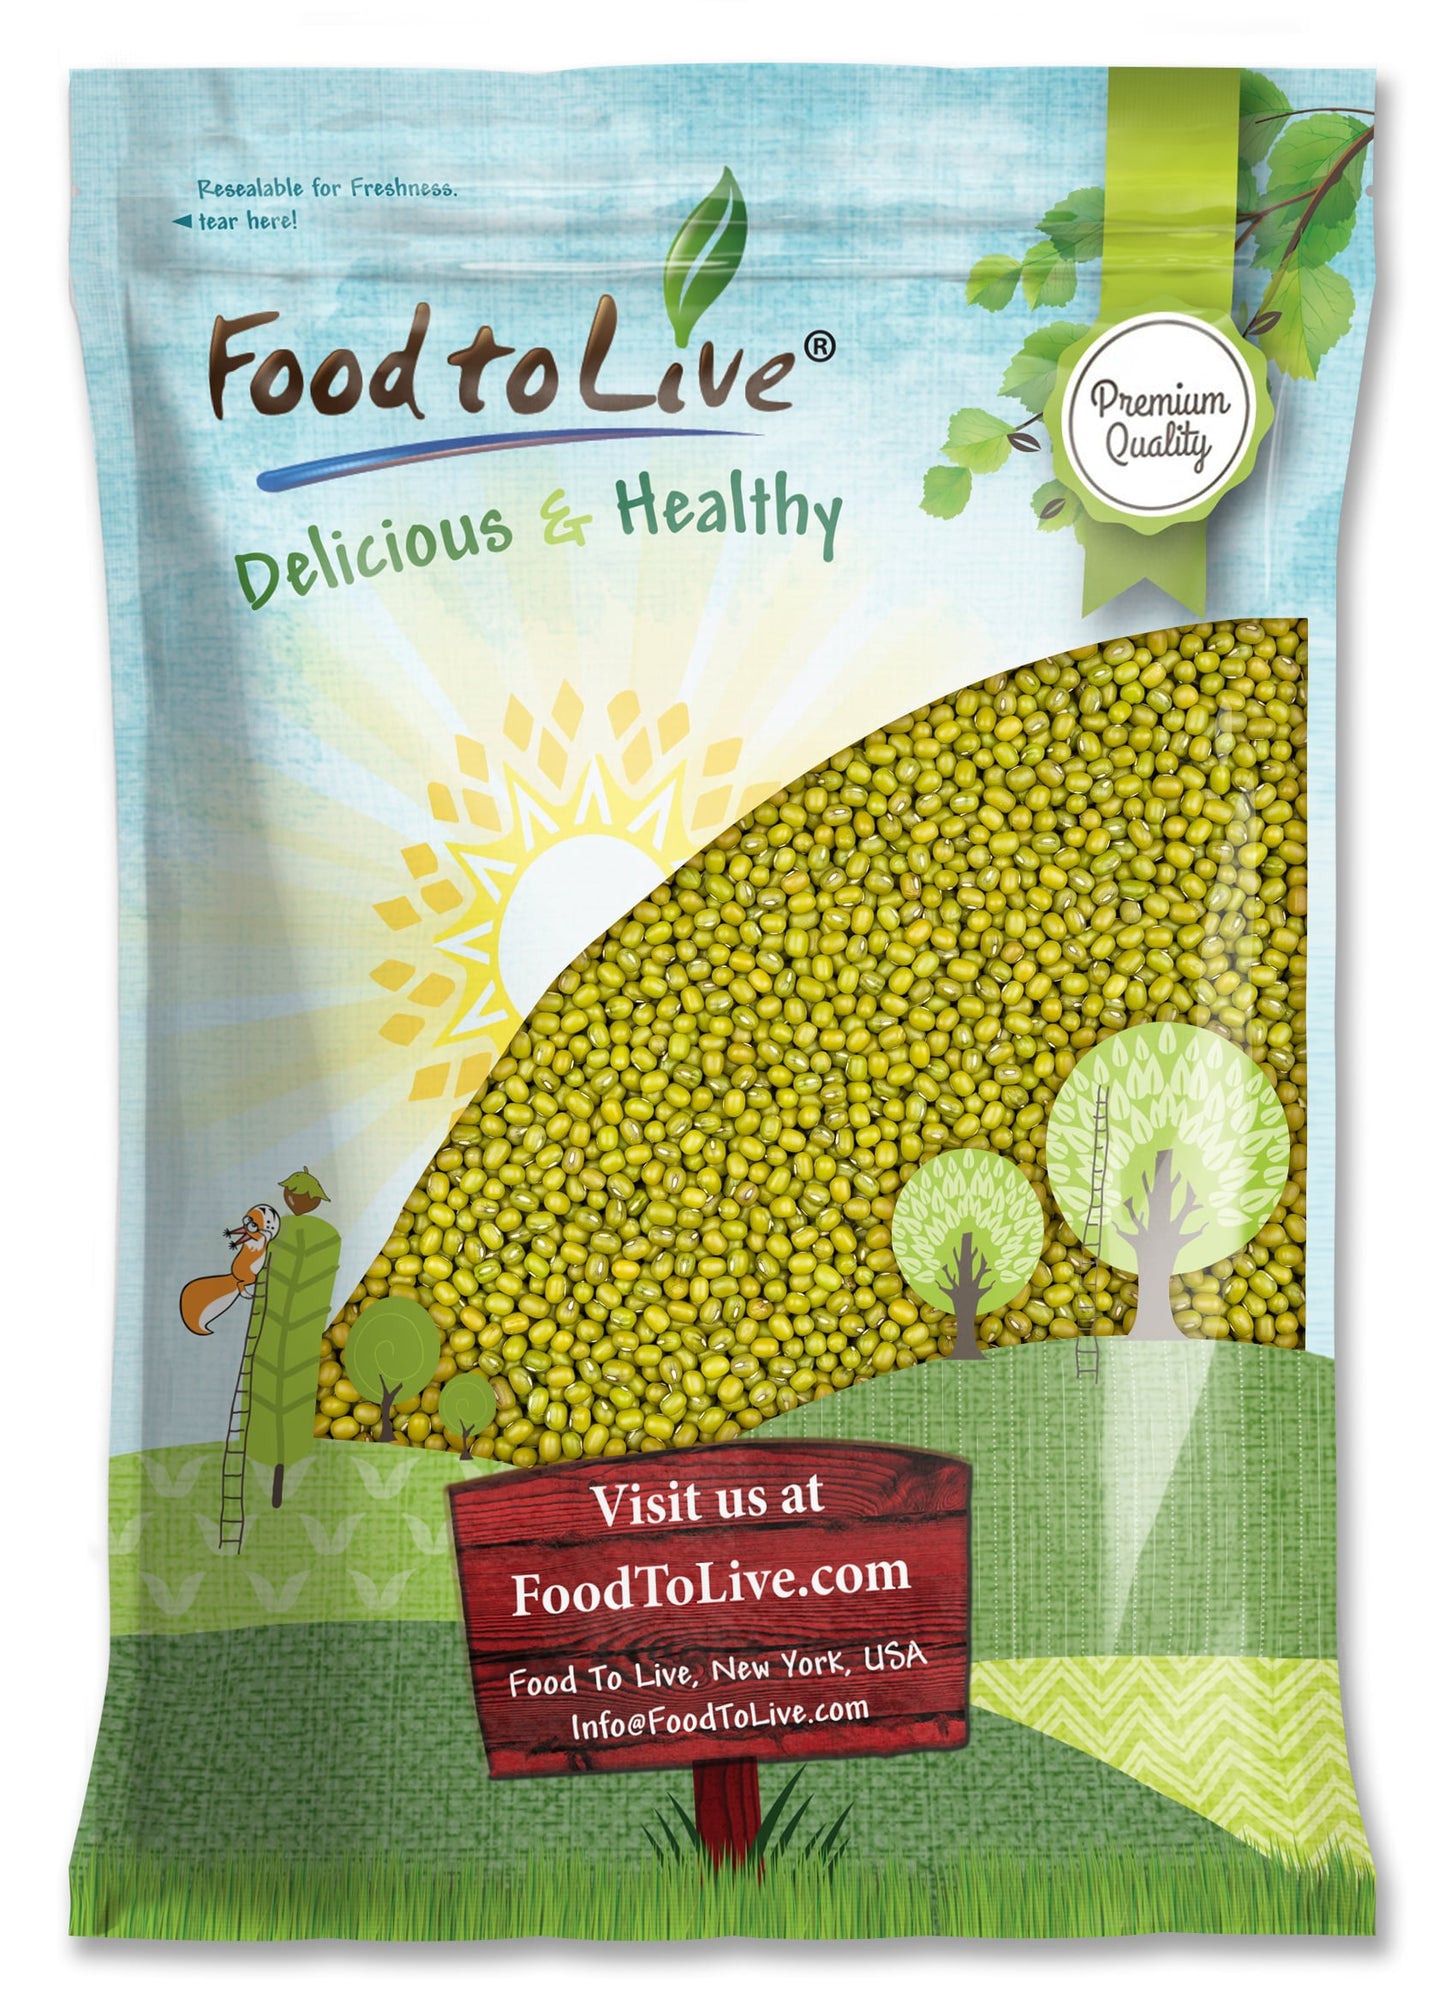 Mung Beans — Whole, Dried, Raw Moong, Kosher, Vegan, Sirtfood, Bulk Green Gram, Low Sodium, Good Source of Dietary Fiber, Protein, Folate, Copper, and Iron. Great for Cooking